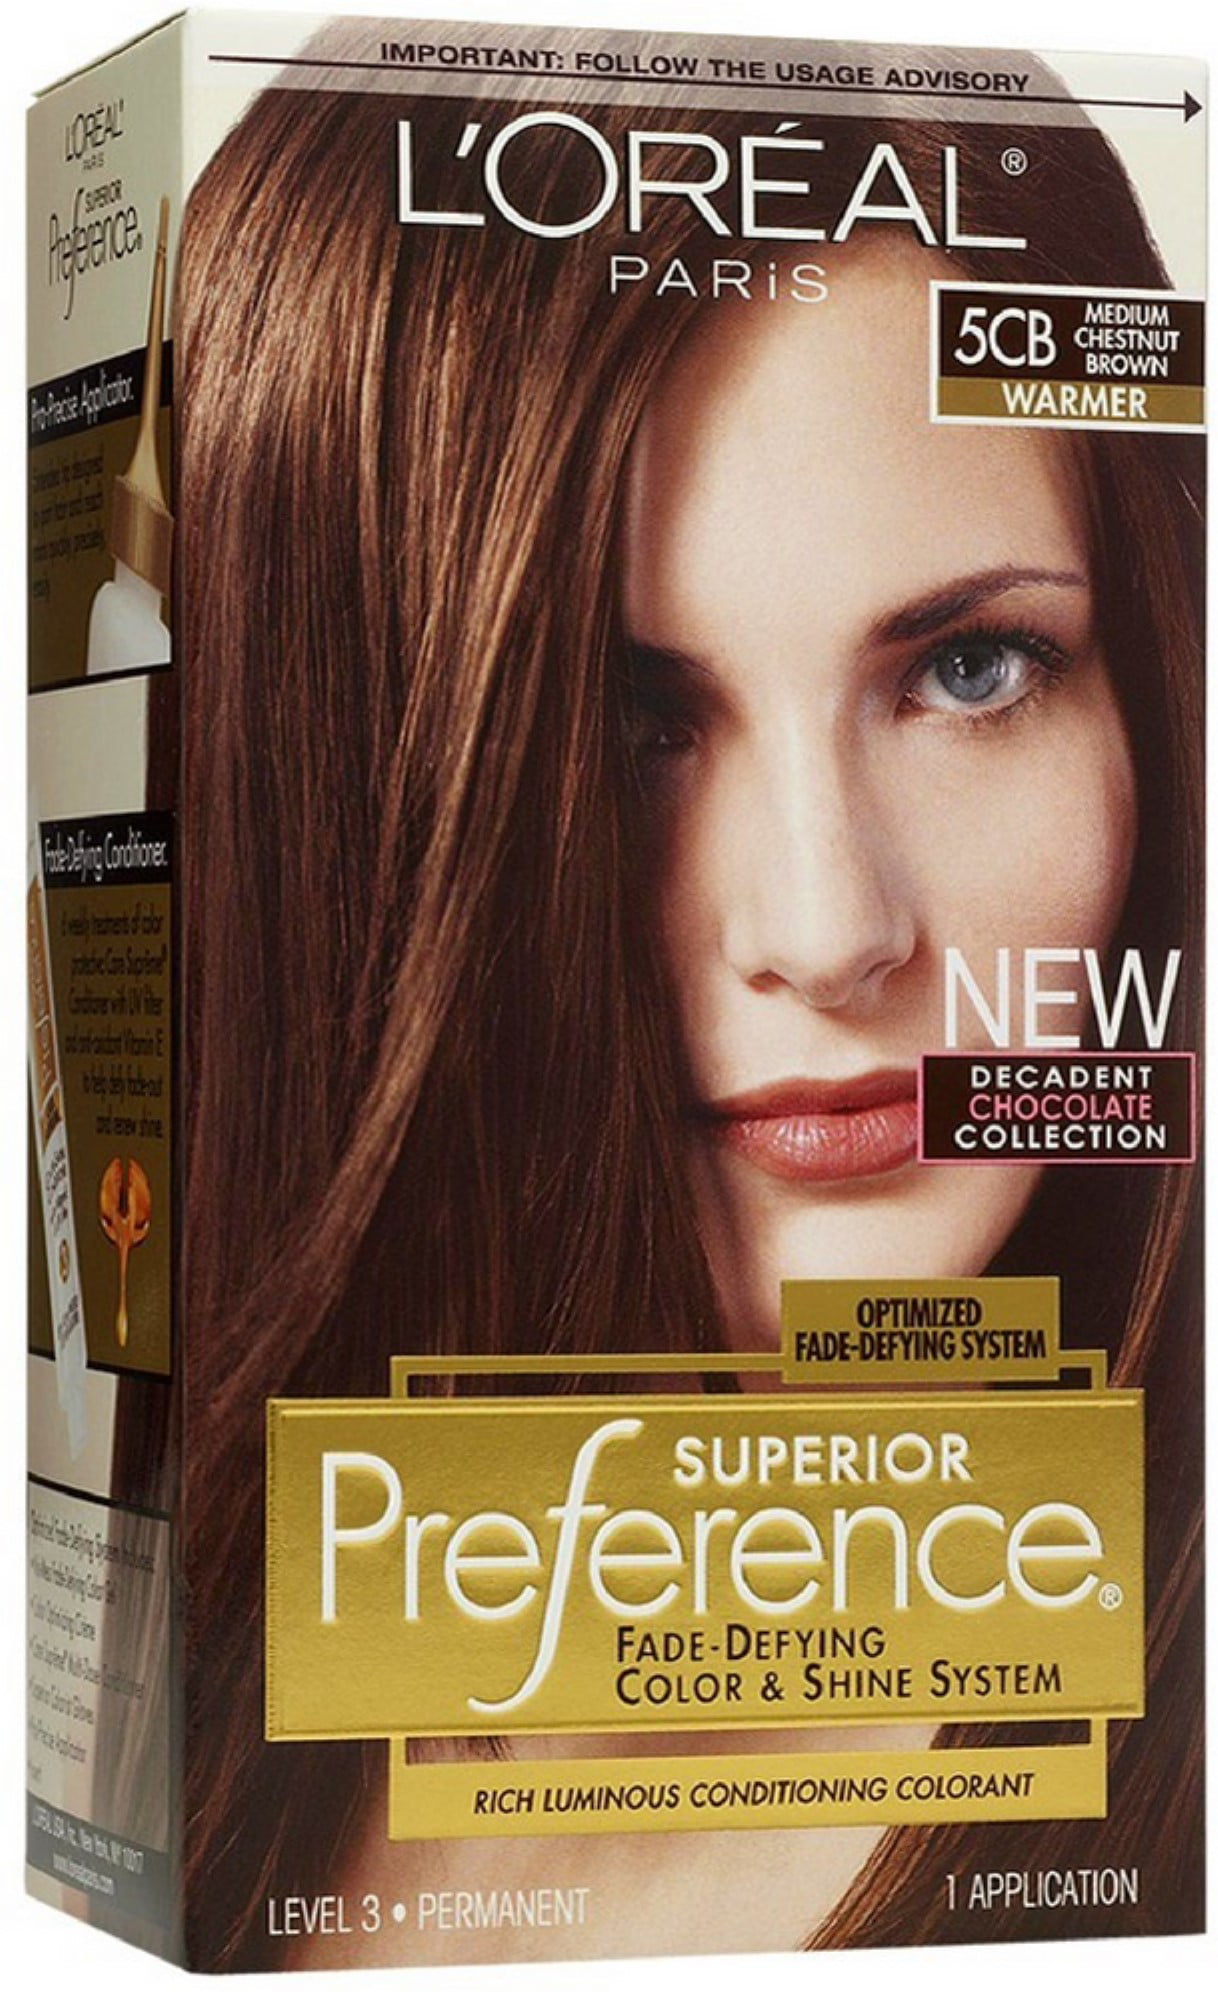 L'Oreal Paris Superior Preference Fade Defying Color & Shine System